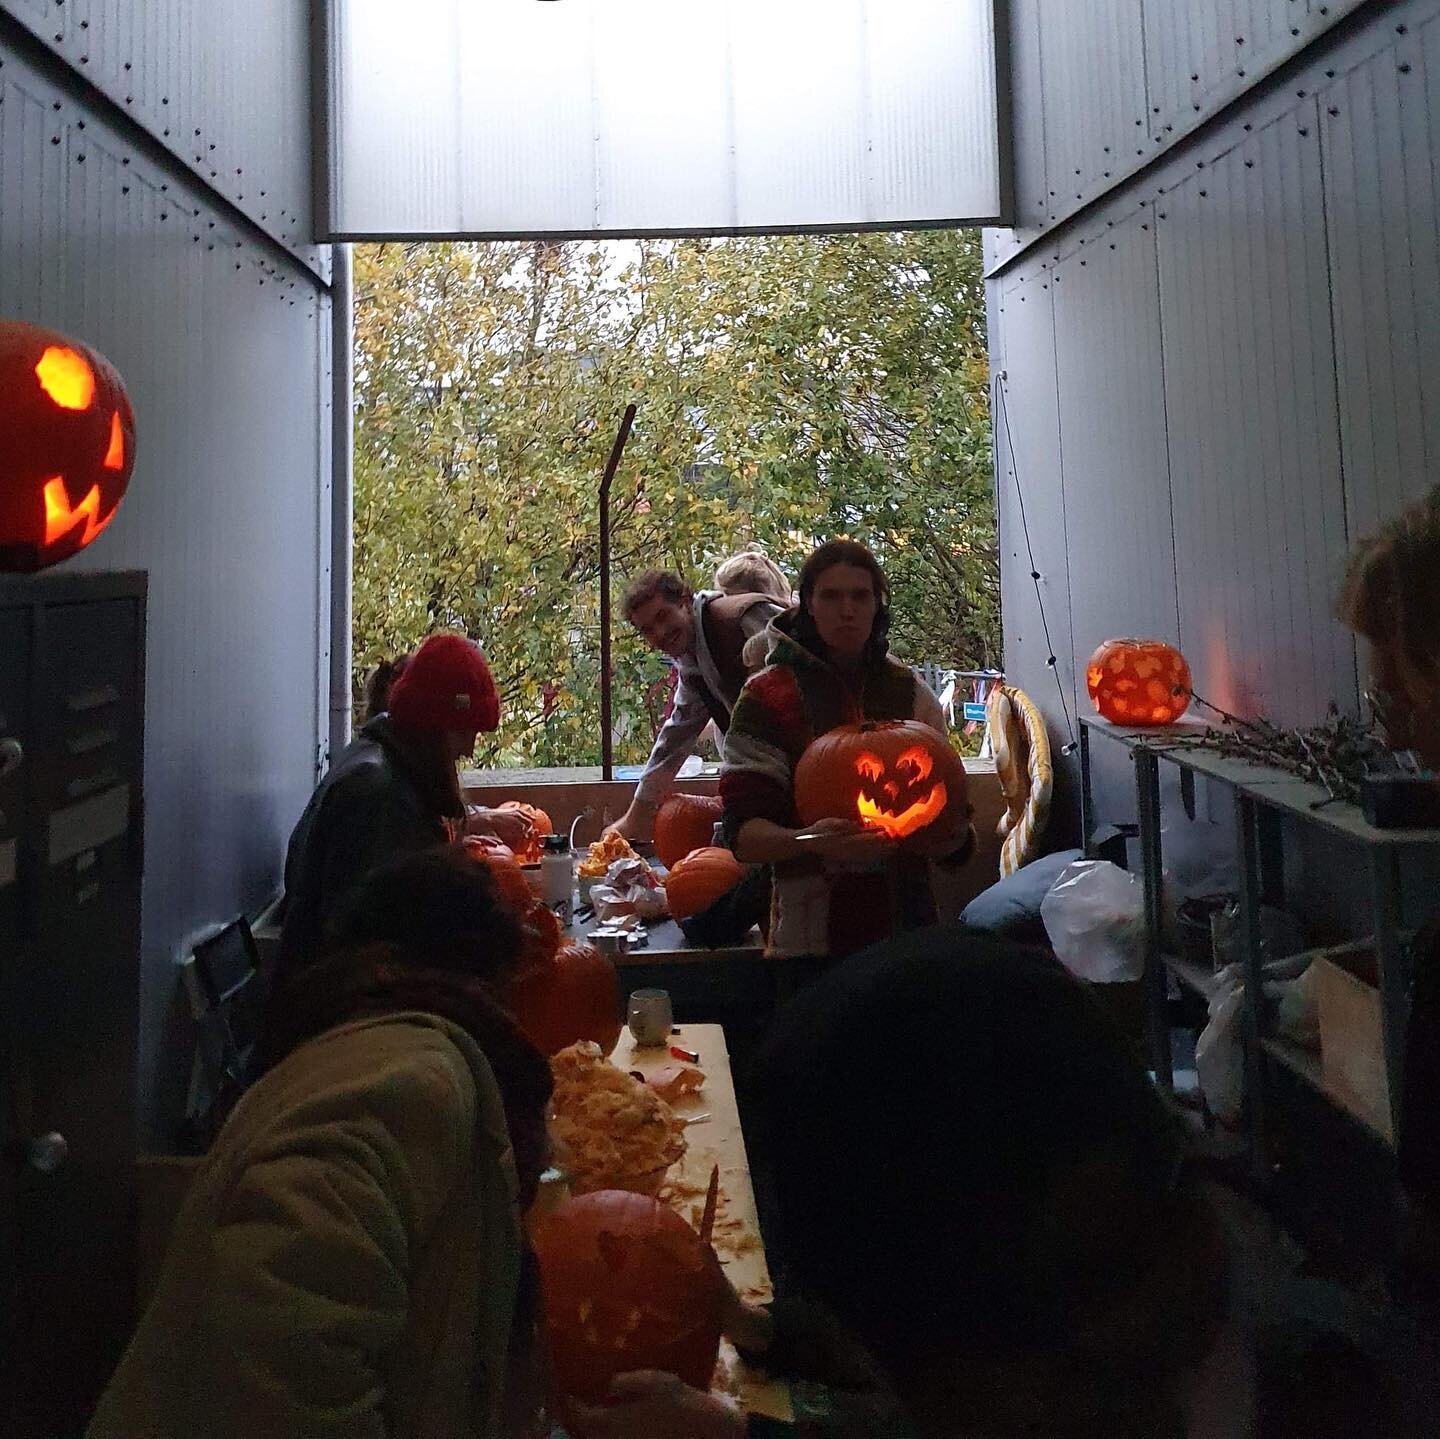 Refshale&oslash;en Villager Rebecca is a smooth operator in fun and spooktivities. Some weeks ago she invited her neighbours to join a frightening cozy pumpkin carving evening in celebration of Halloween and look at the results! 🎃🧡 

Thank you Rebe